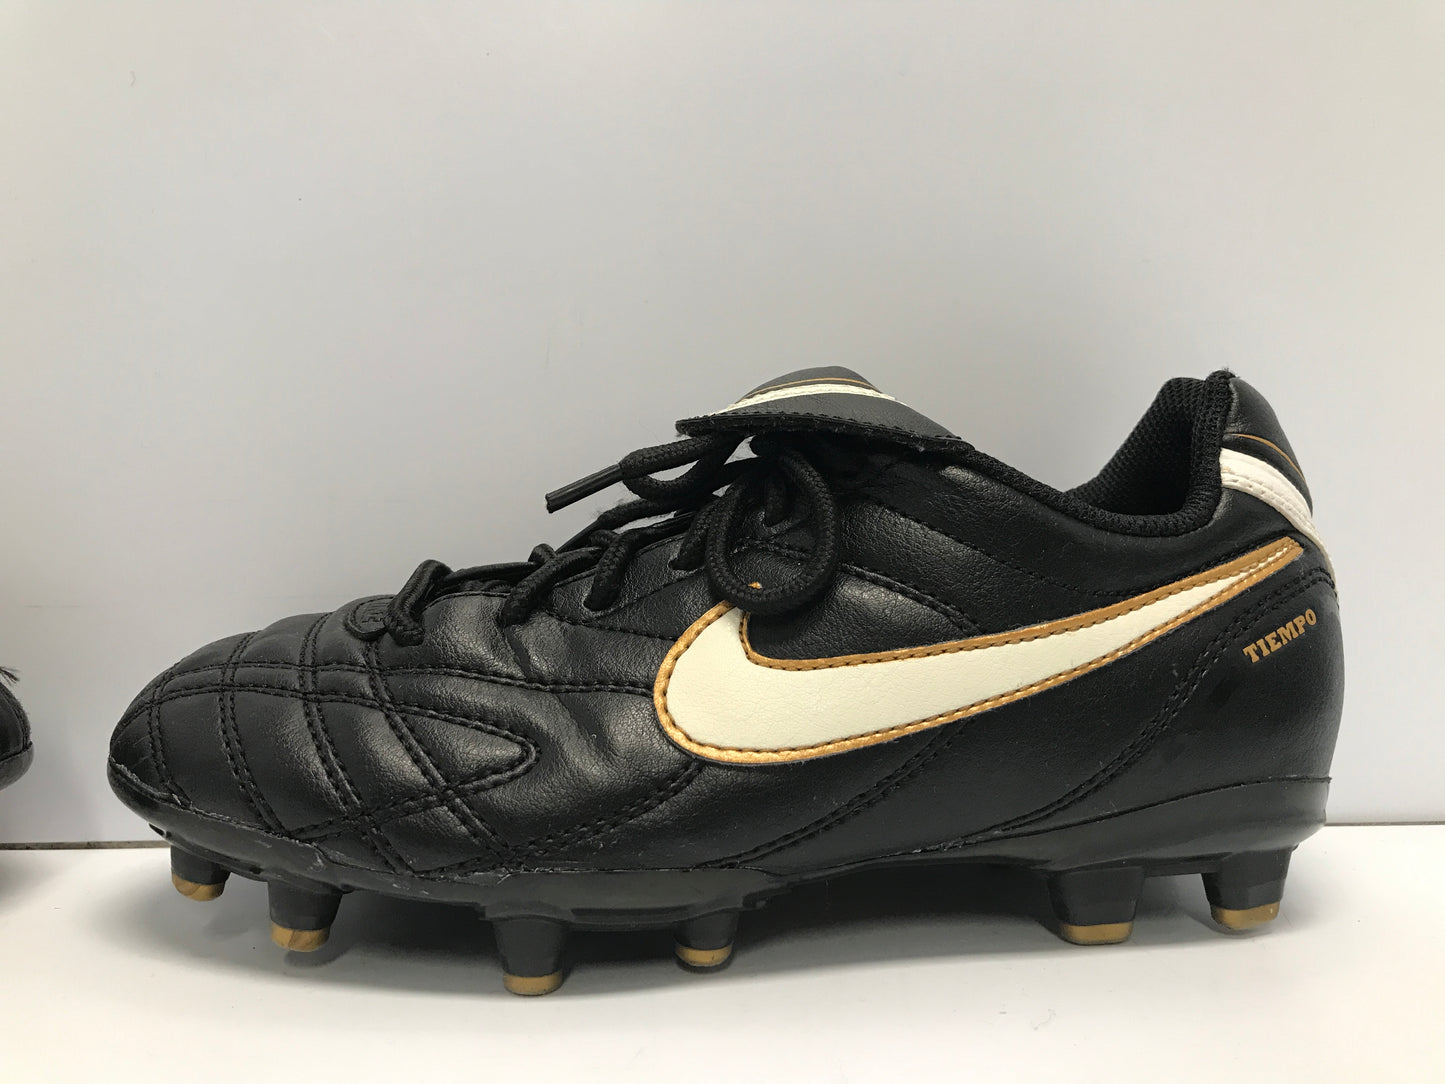 Soccer Shoes Cleats Child Size 1.5 Nike Tiempo Black Gold